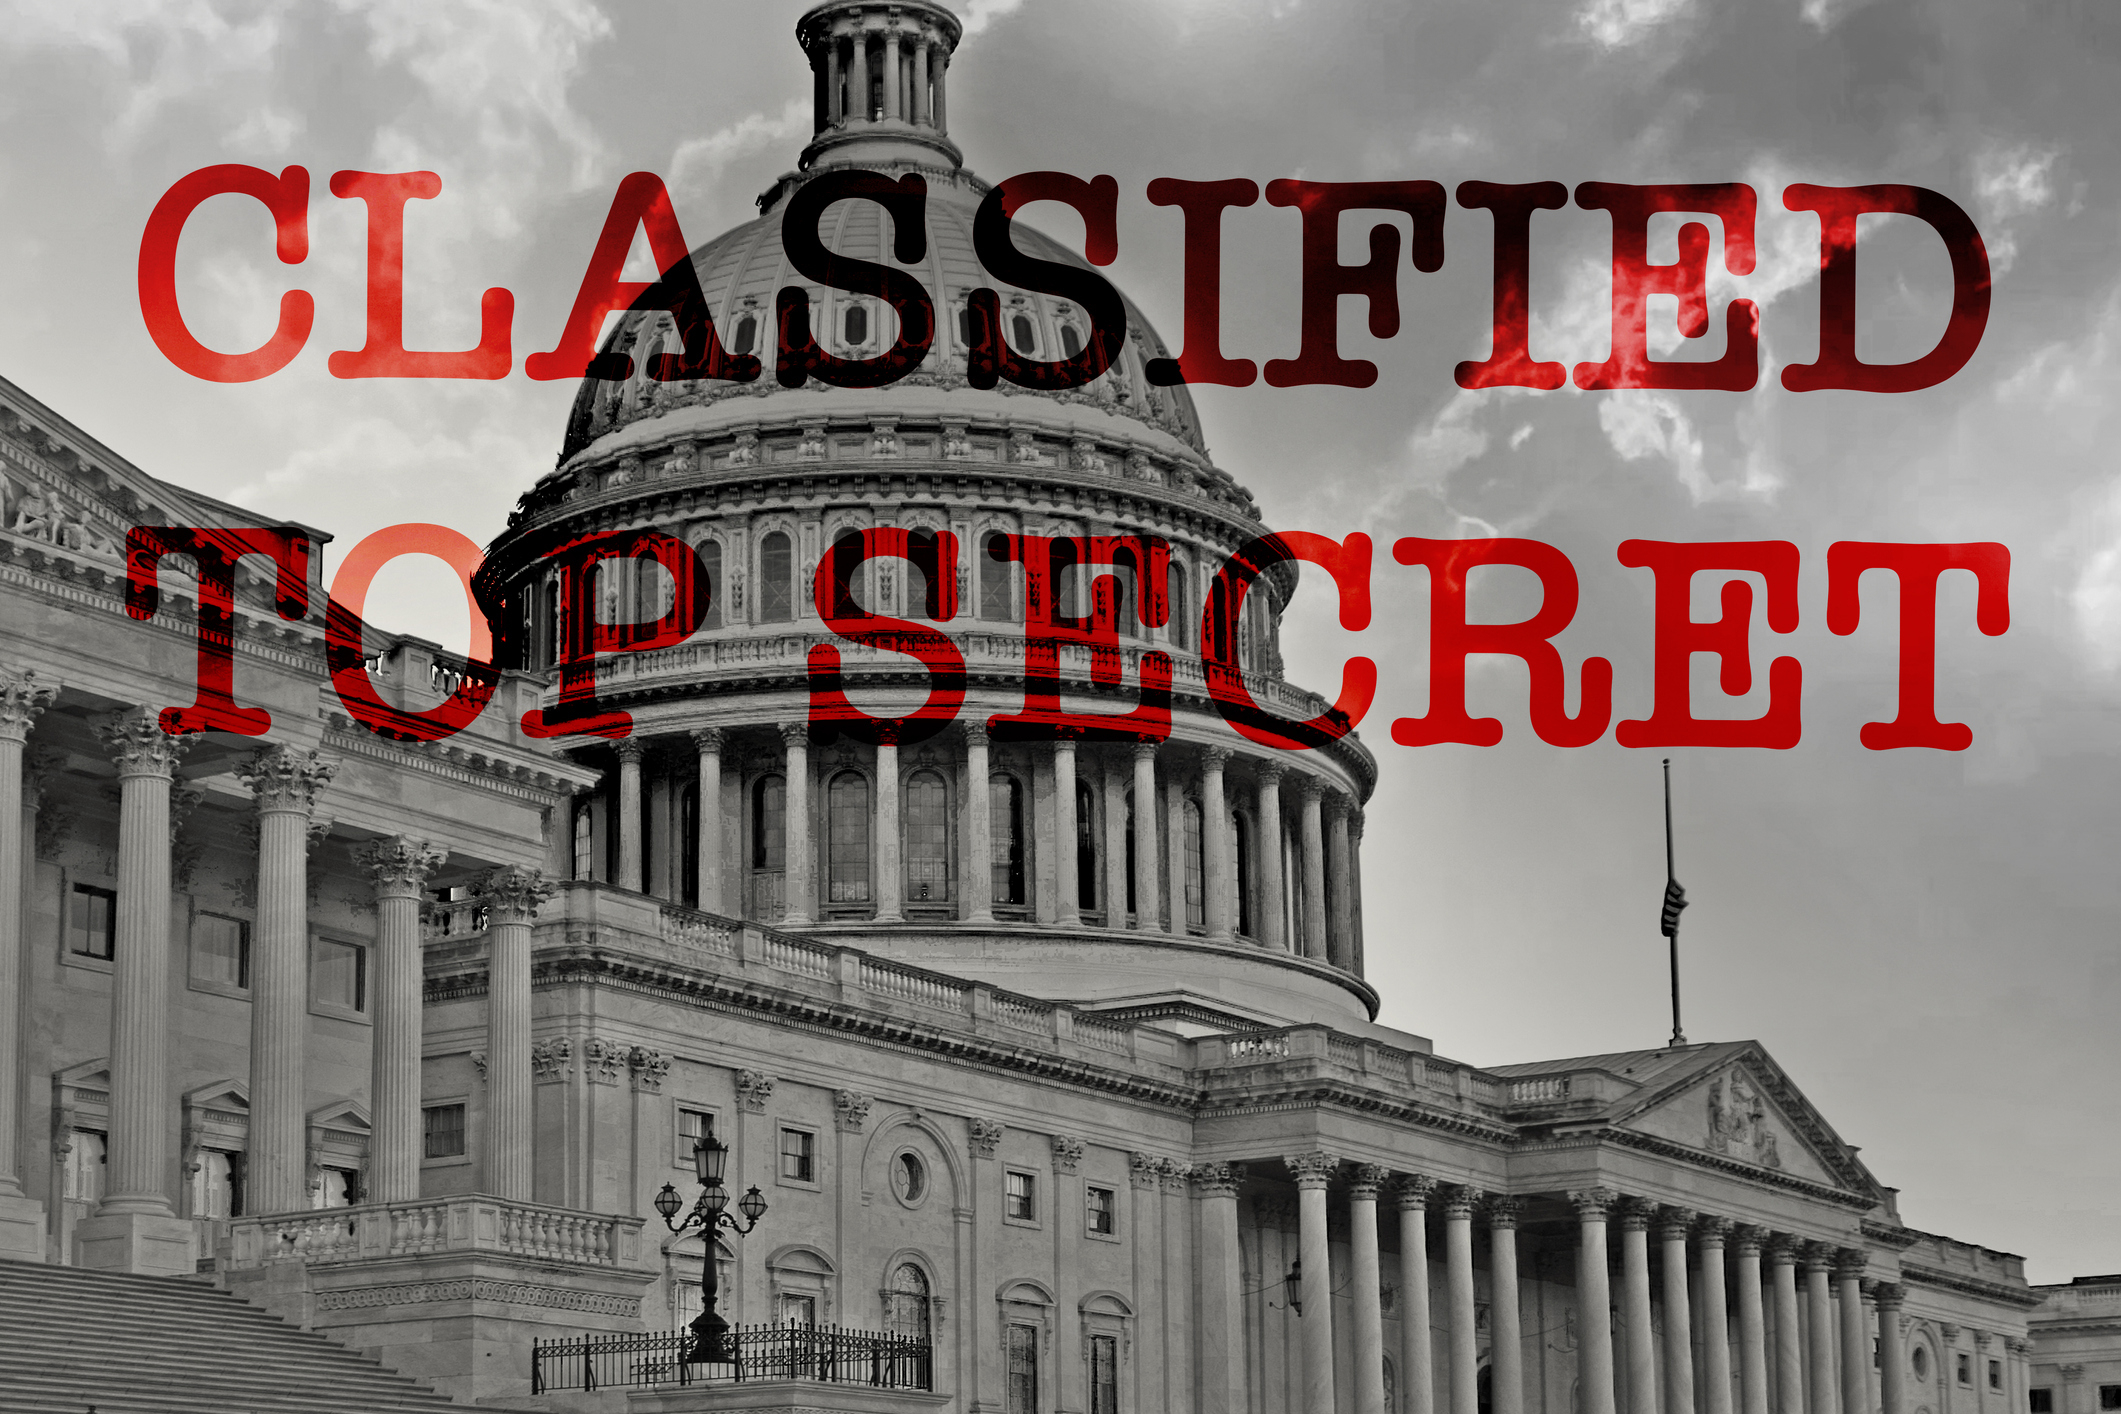 Image of the Capitol Building with the words &quot;CLASSIFIED TOP SECRET&quot; superimposed